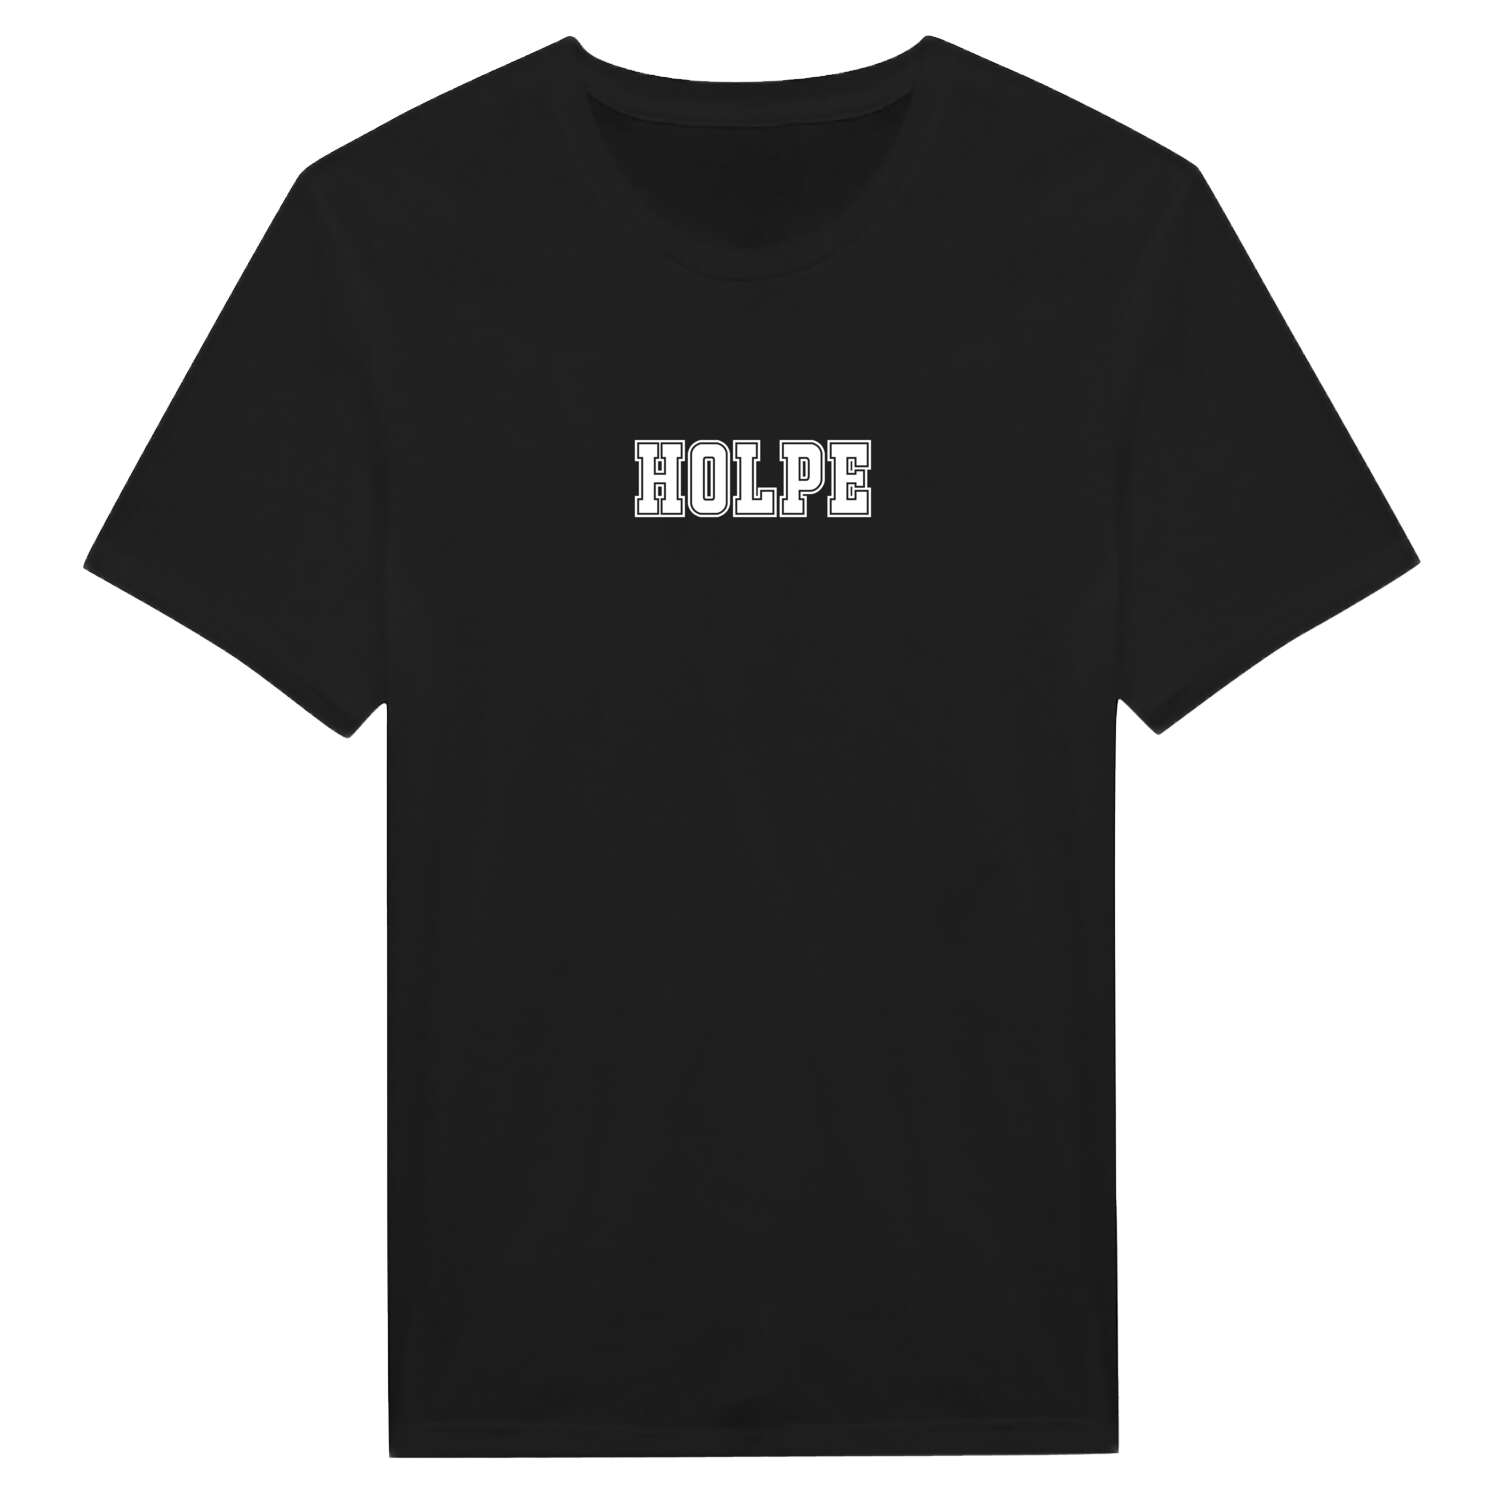 Holpe T-Shirt »Classic«